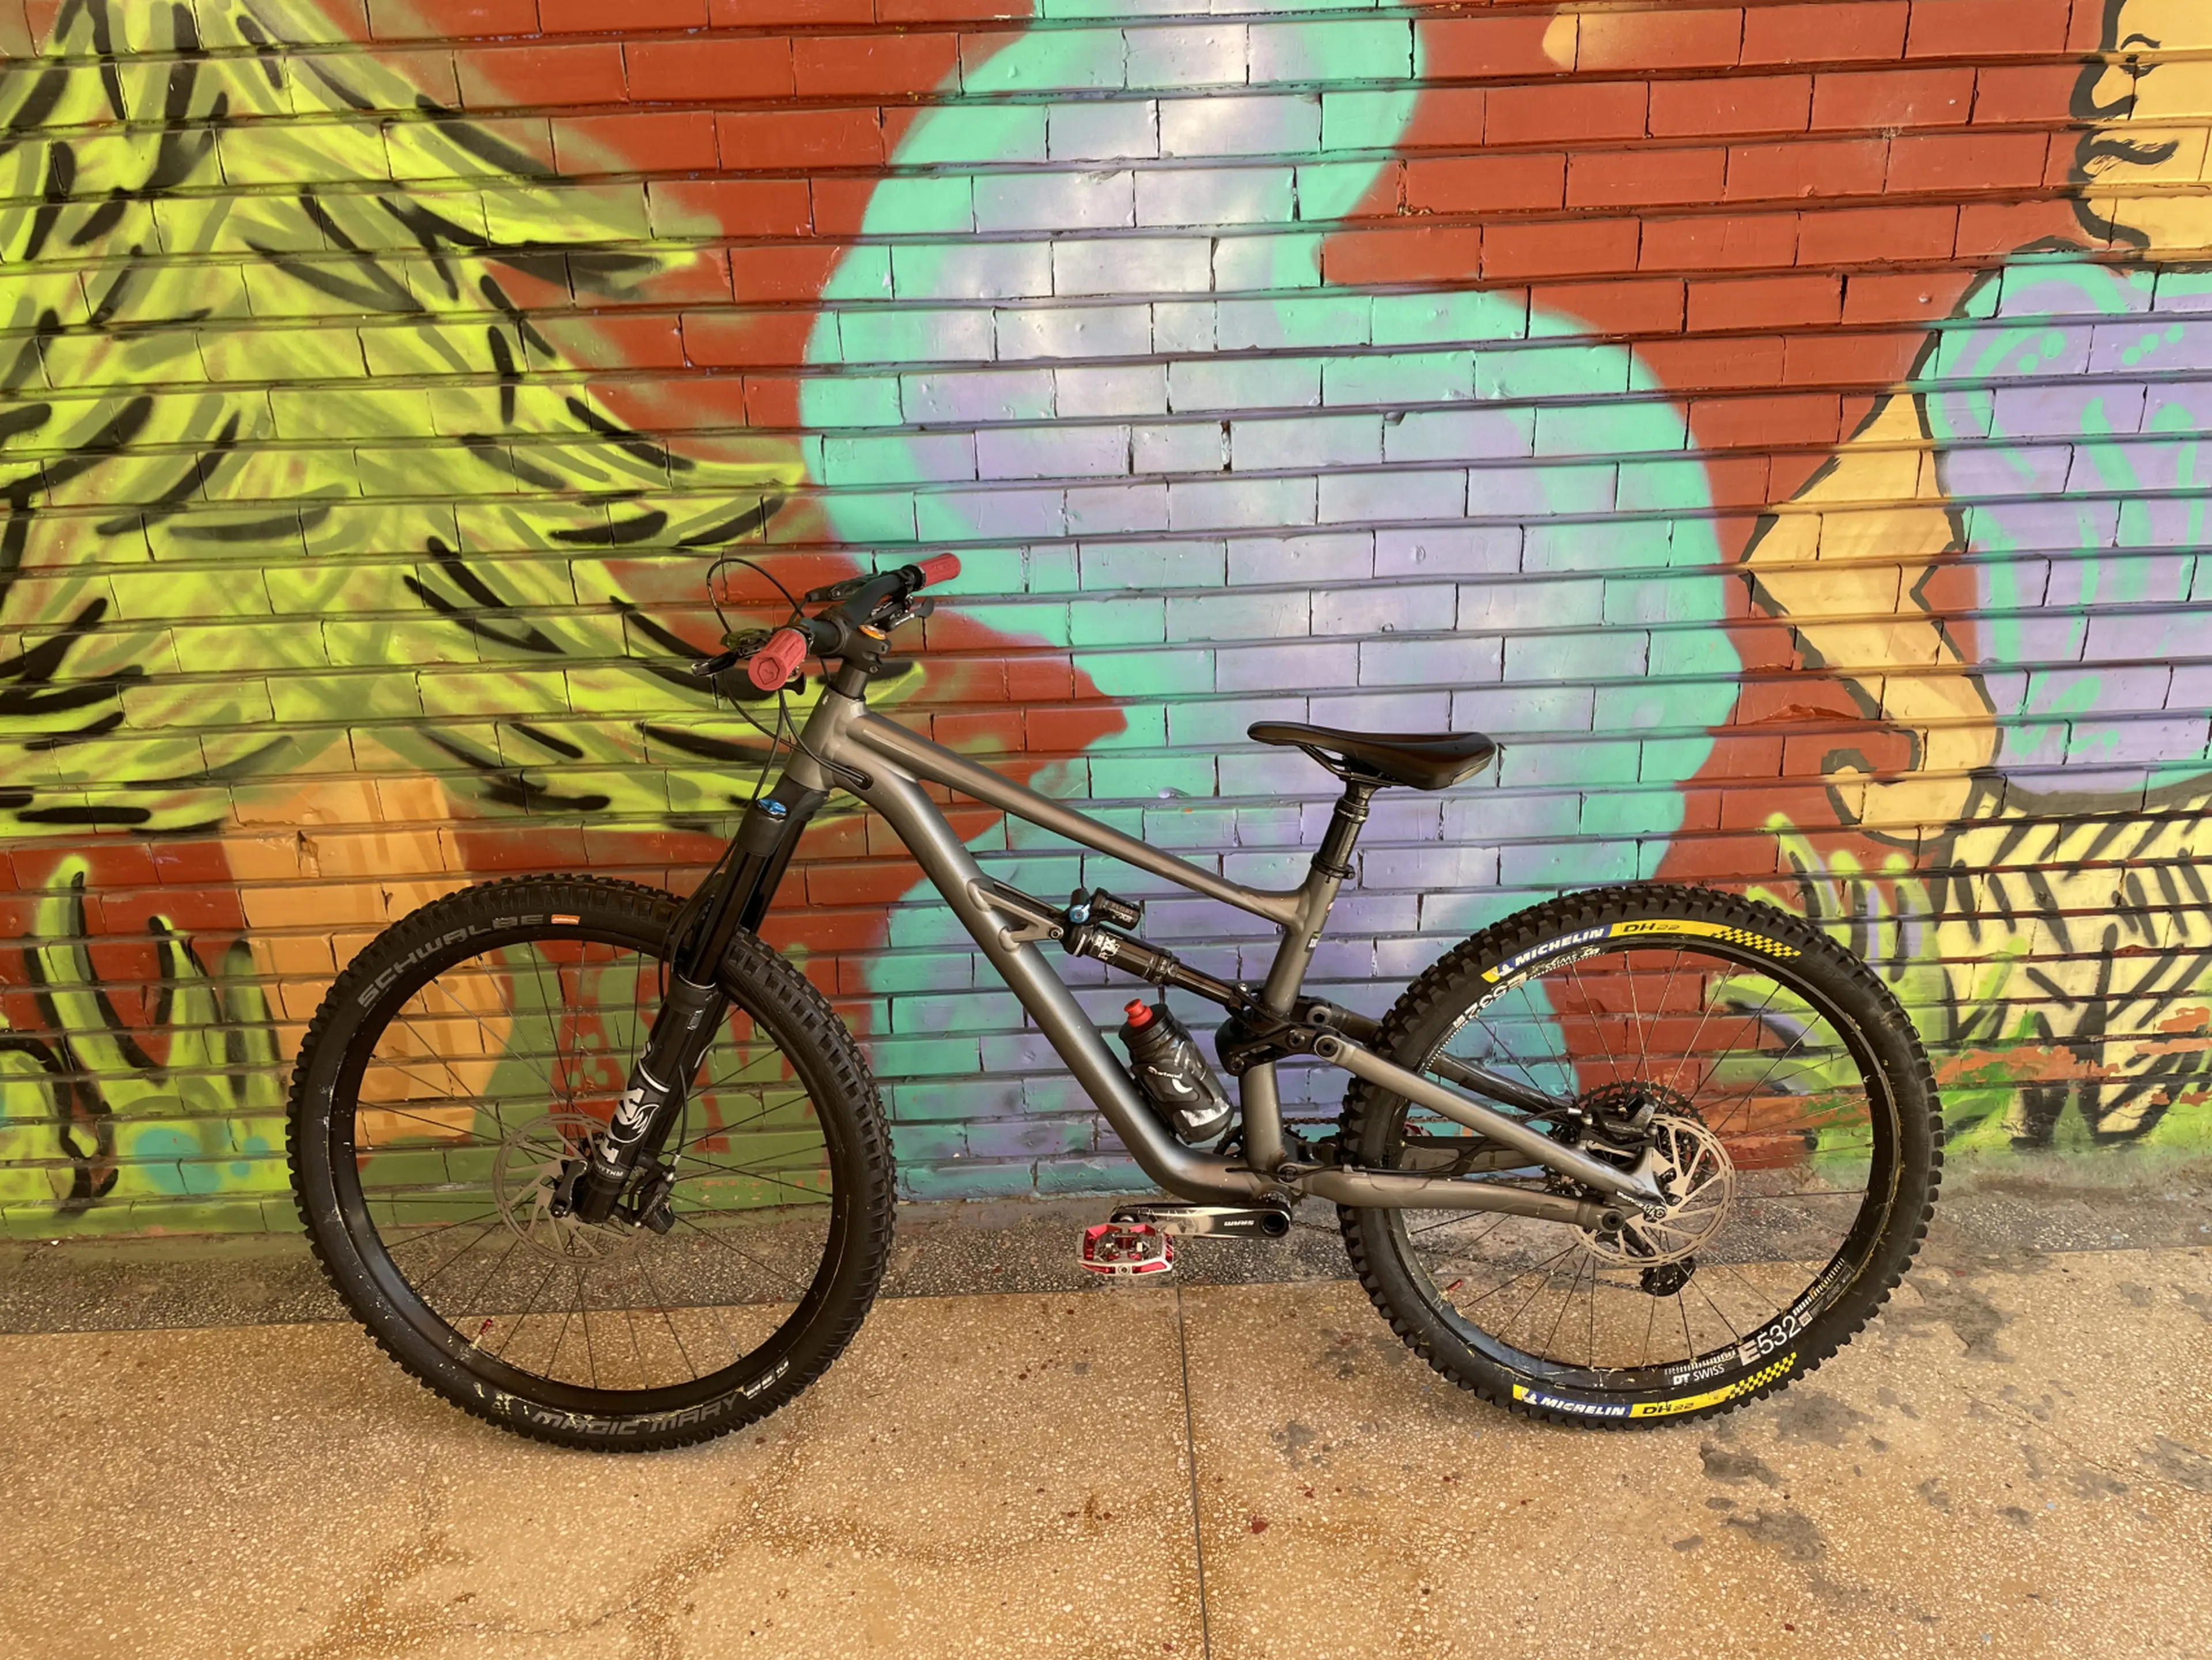 2. Specialized Status 160 Mullet